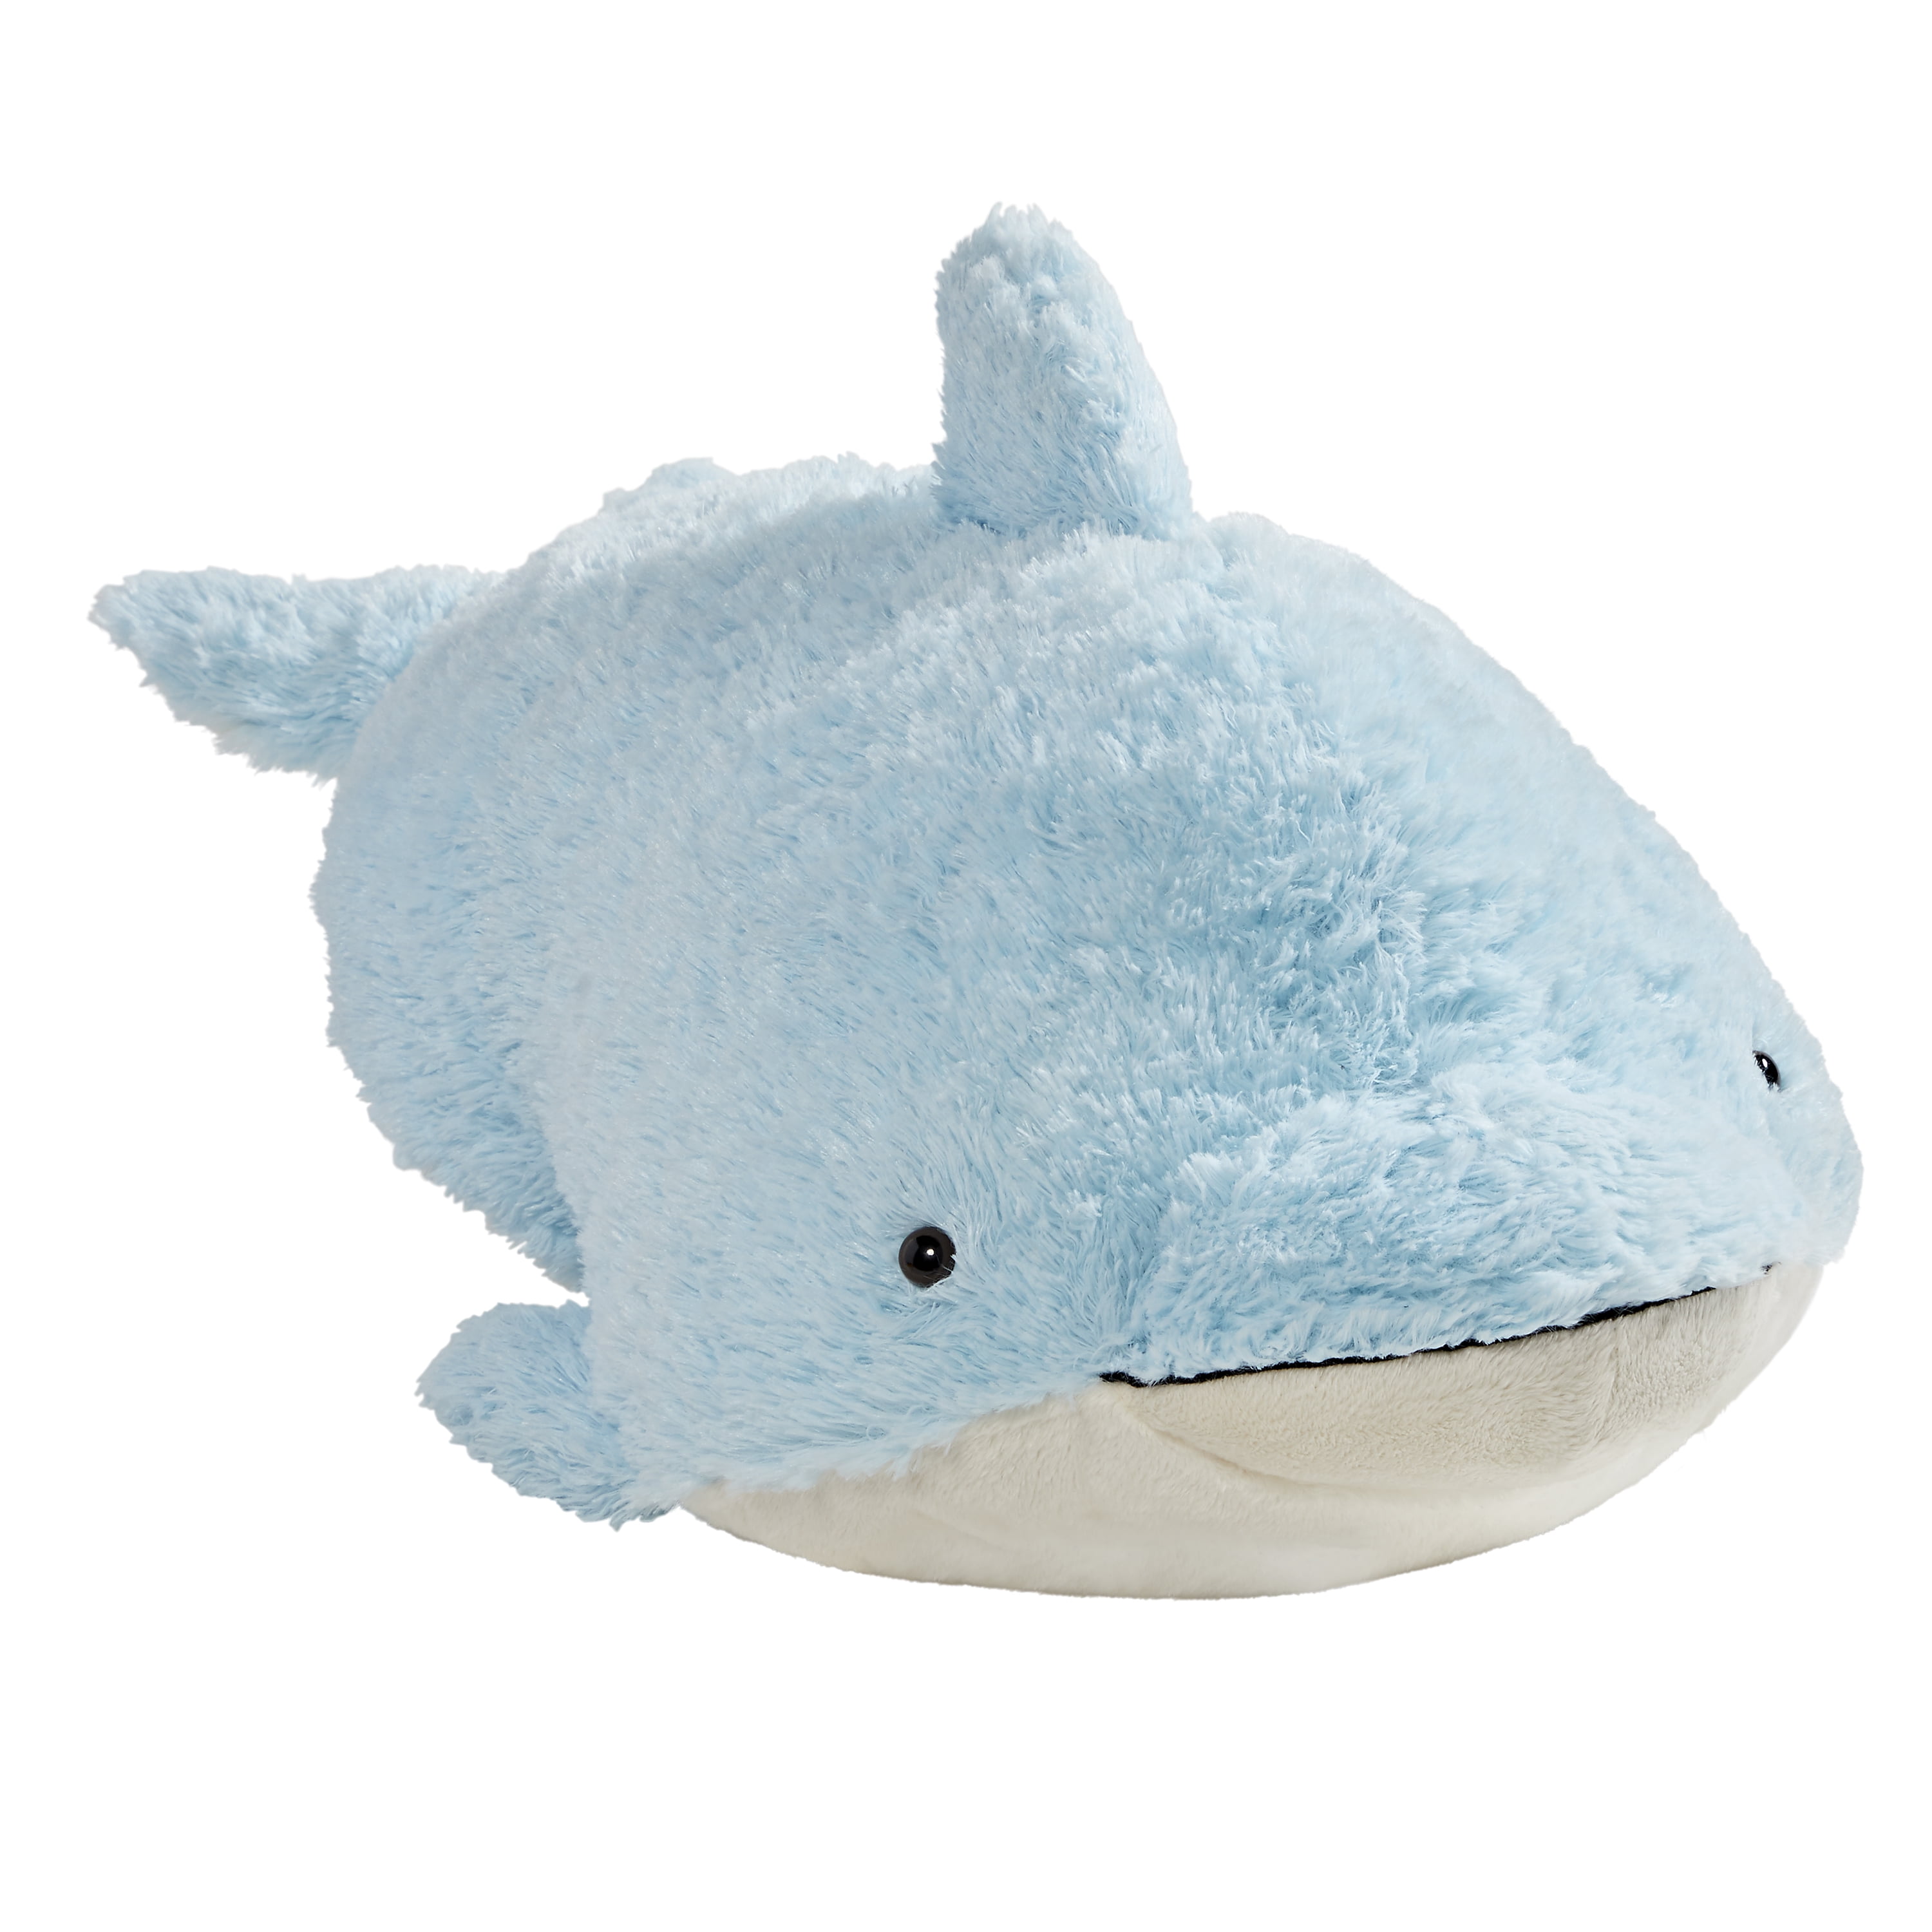 Authentic Original Pillow Pets Squeaky large Dolphin Large 24"--NEW WITH TAGS 